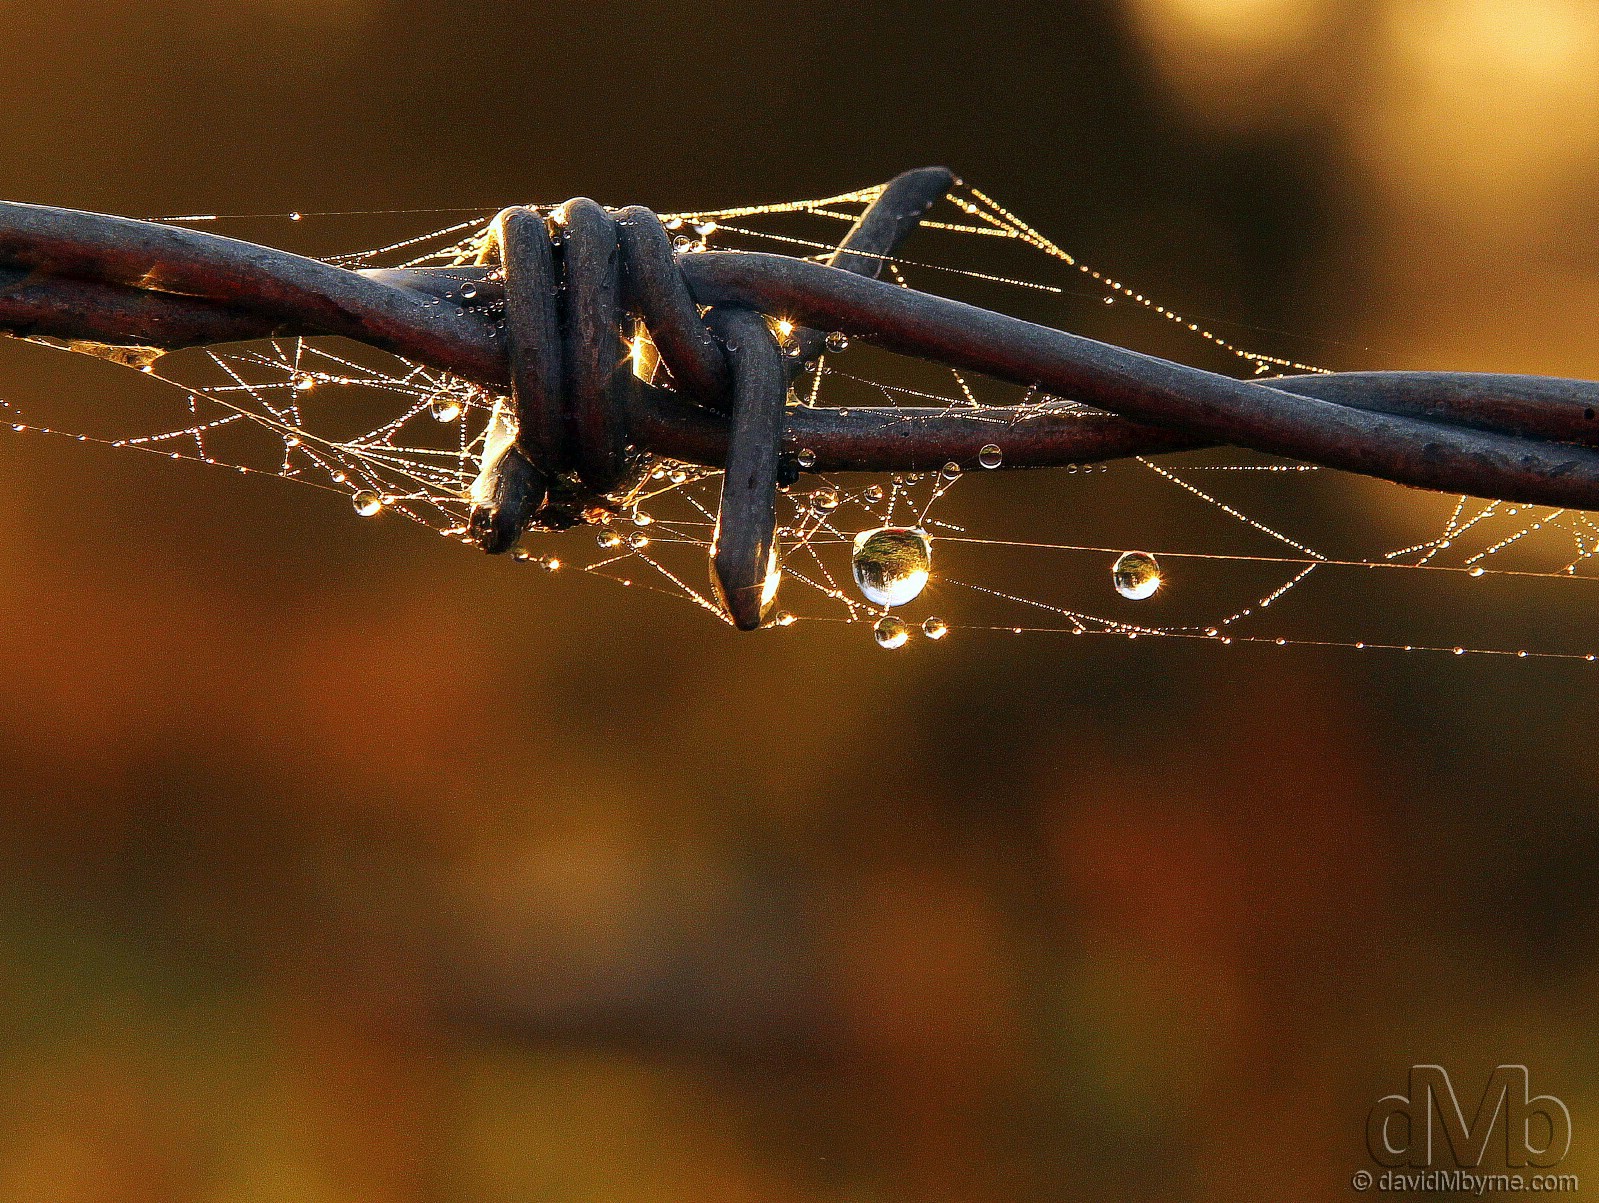 Sunrise dewdrop reflections in Knockgroghery, Co. Roscommon, Ireland. November 20th, 2011 (EOS 60D || Tamron 28-75mm || 75mm, 1/125sec, f/9.0, iso320)